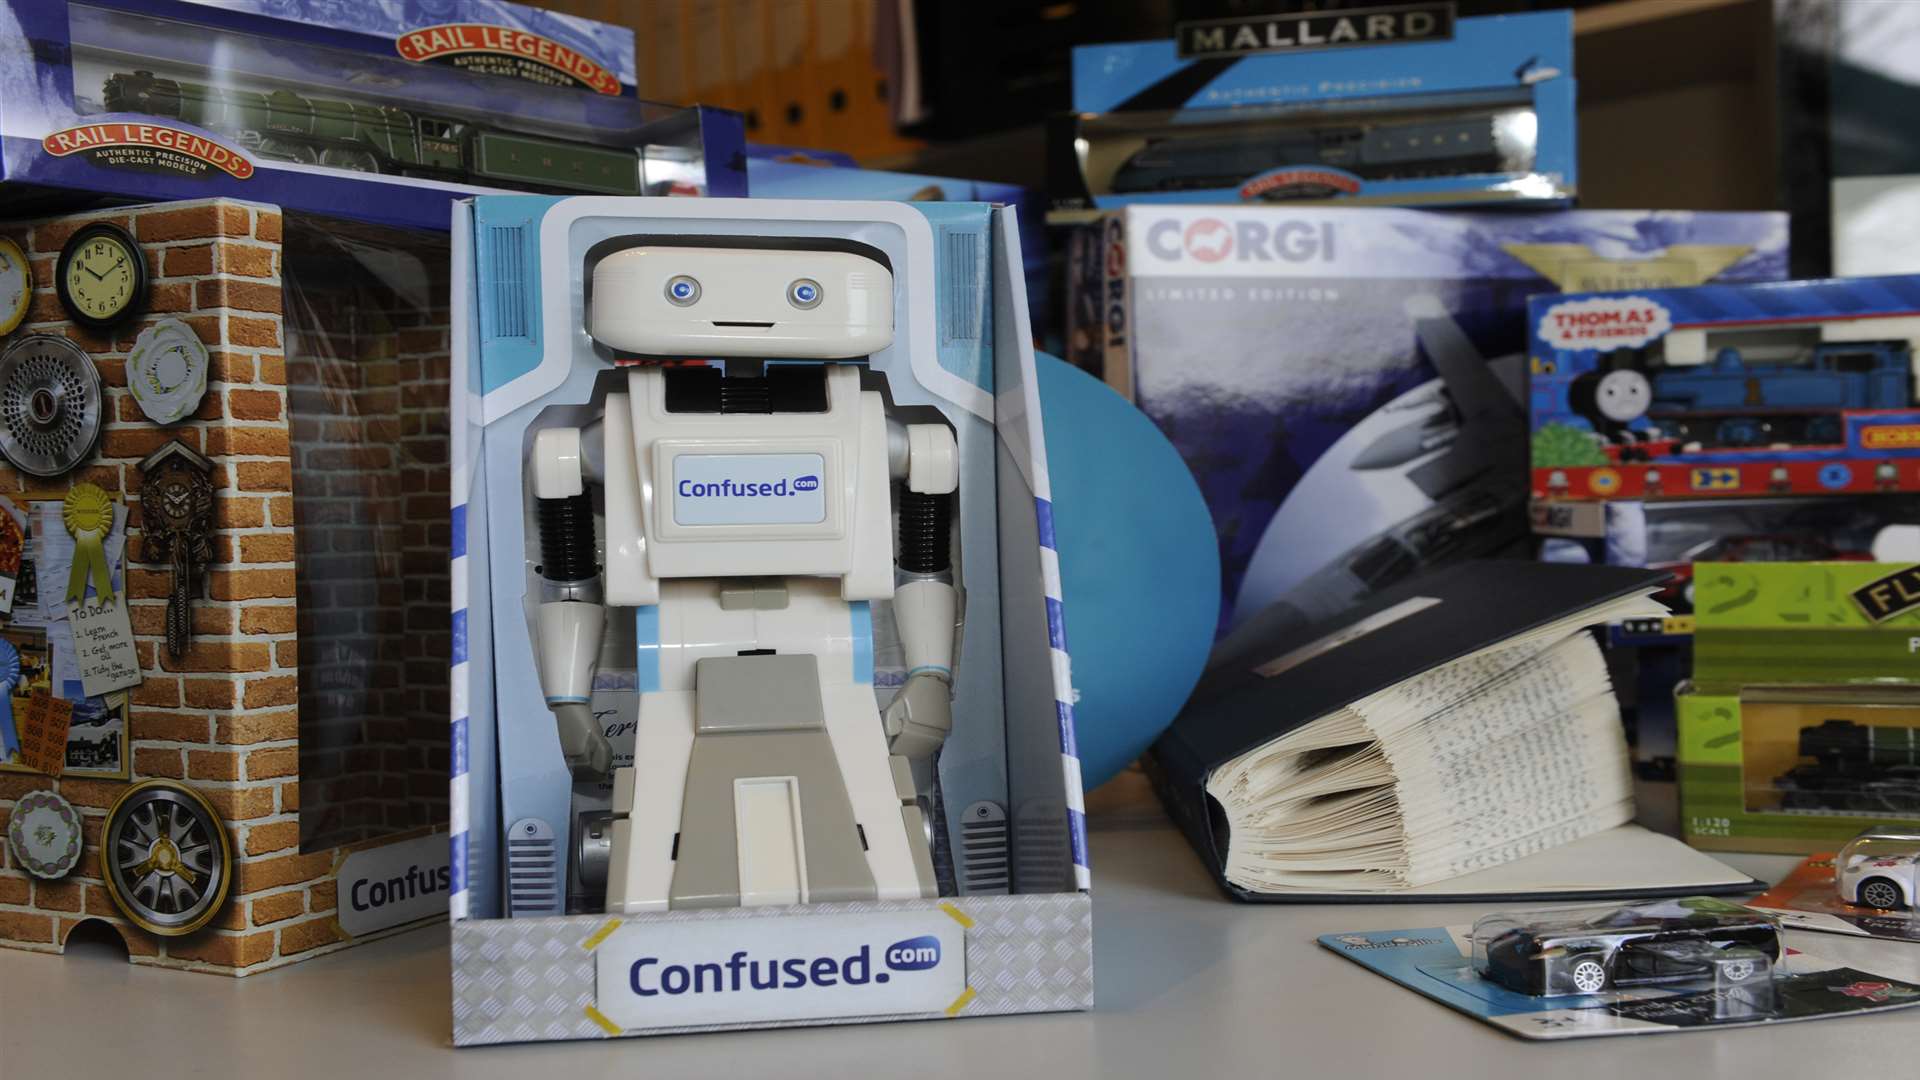 Drew Selman designed packaging for Brian the robot toys to be given to Confused.com customers